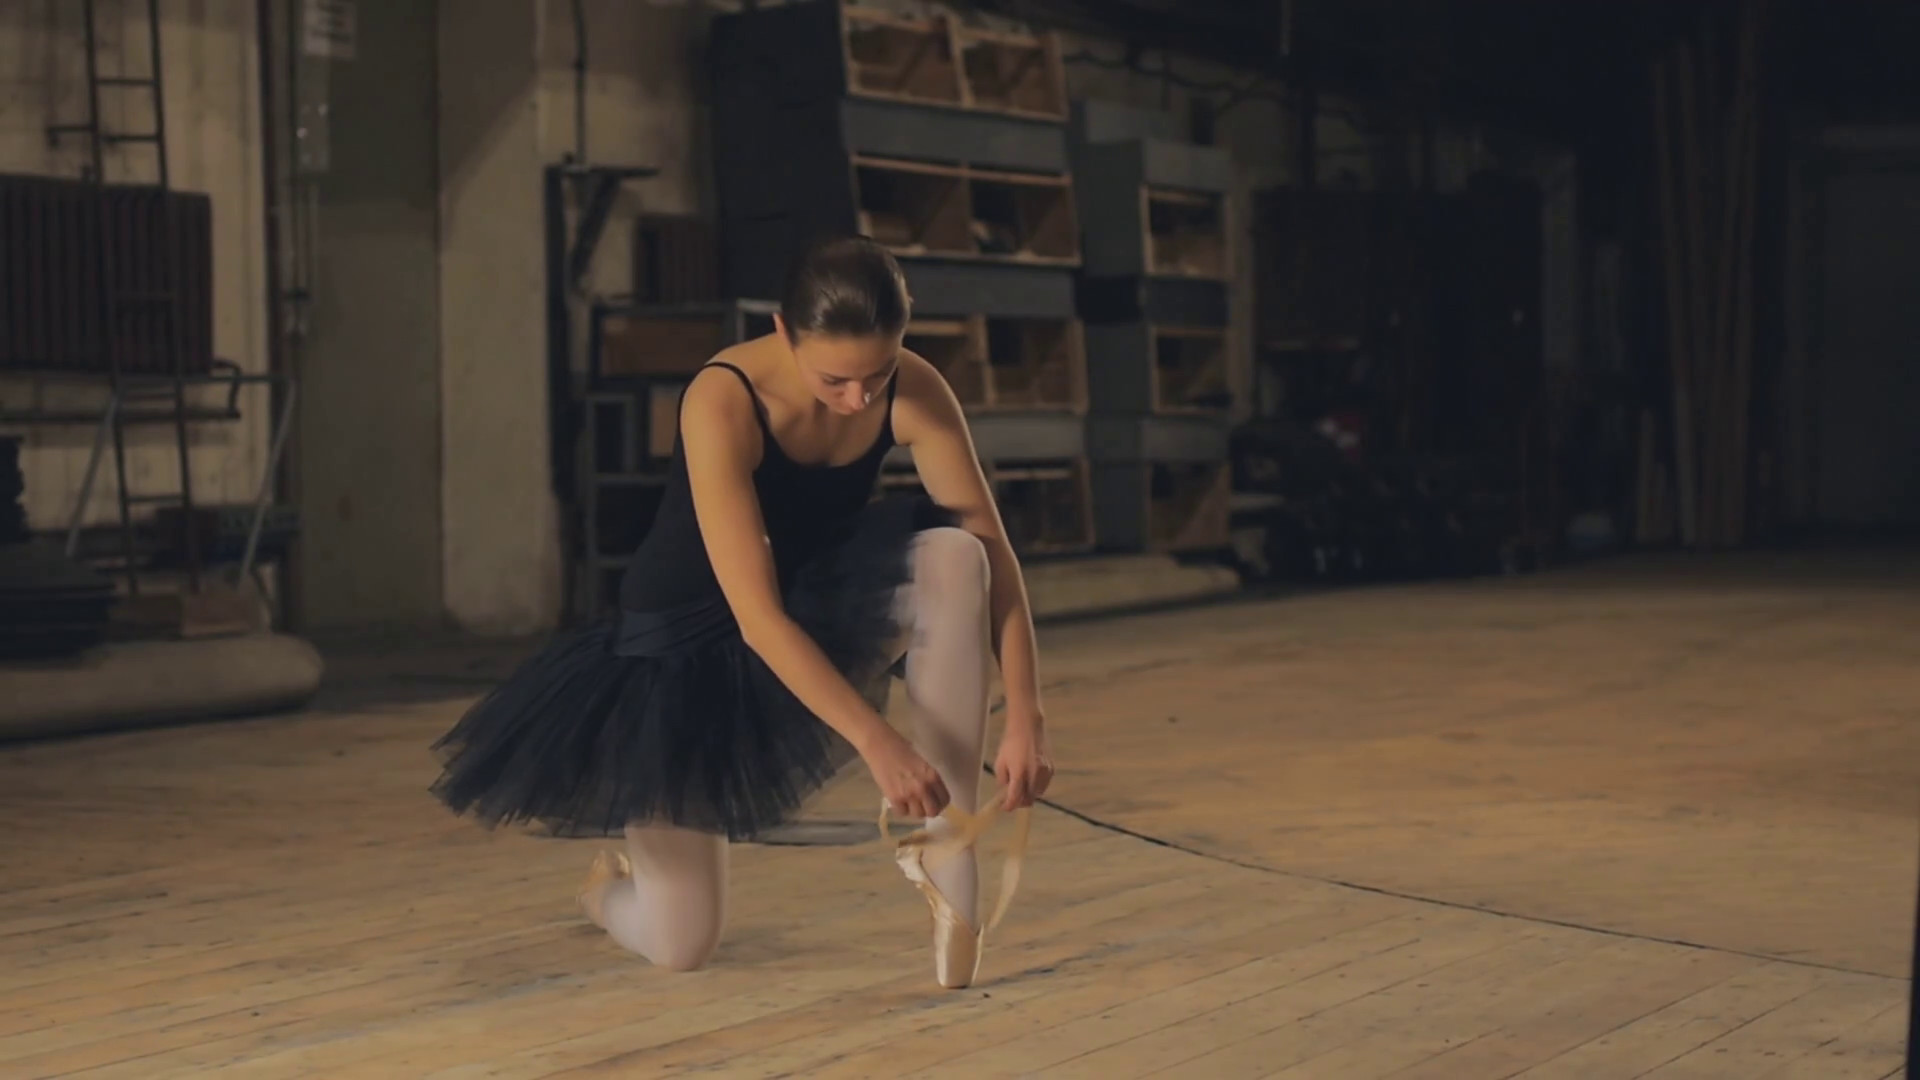 1920x1080 Ballerina tying pointe shoes backstage Stock Video Footage - Storyblocks  Video